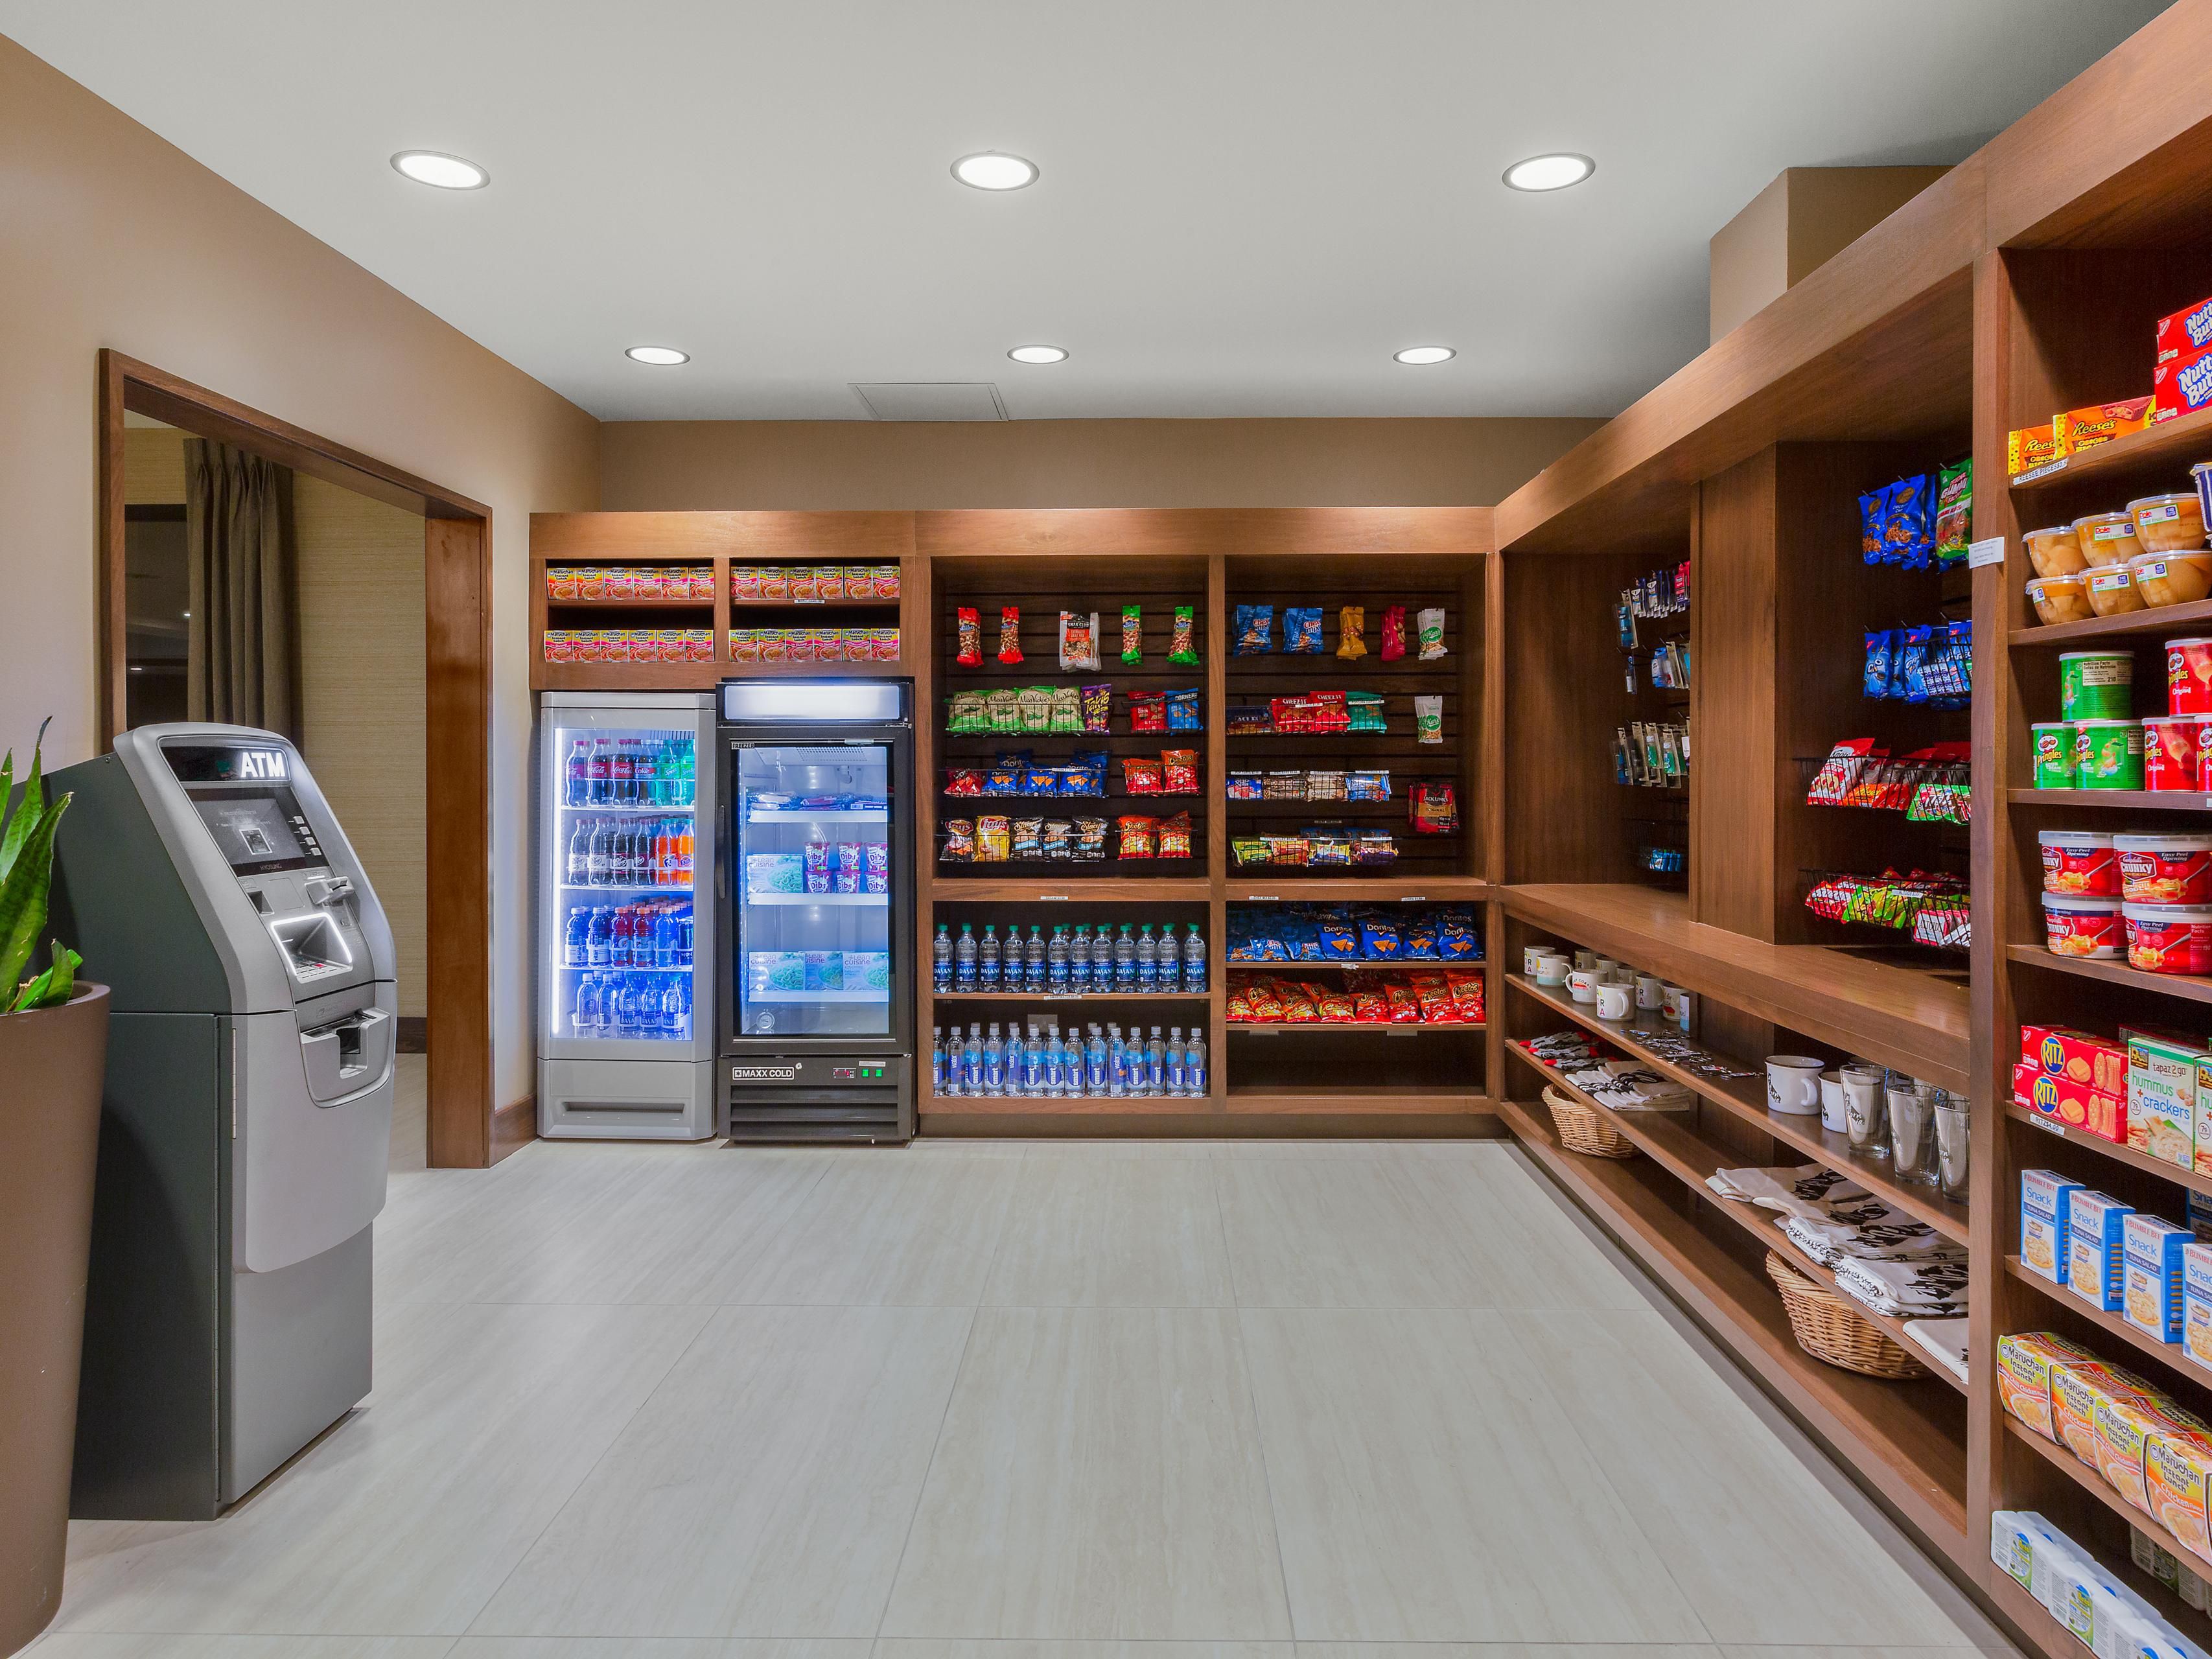 Whether it’s a soft drink and snack before you call it a day, or perhaps some needed sundries our Pantry is open to satisfy your immediate needs.  Located on lobby level.